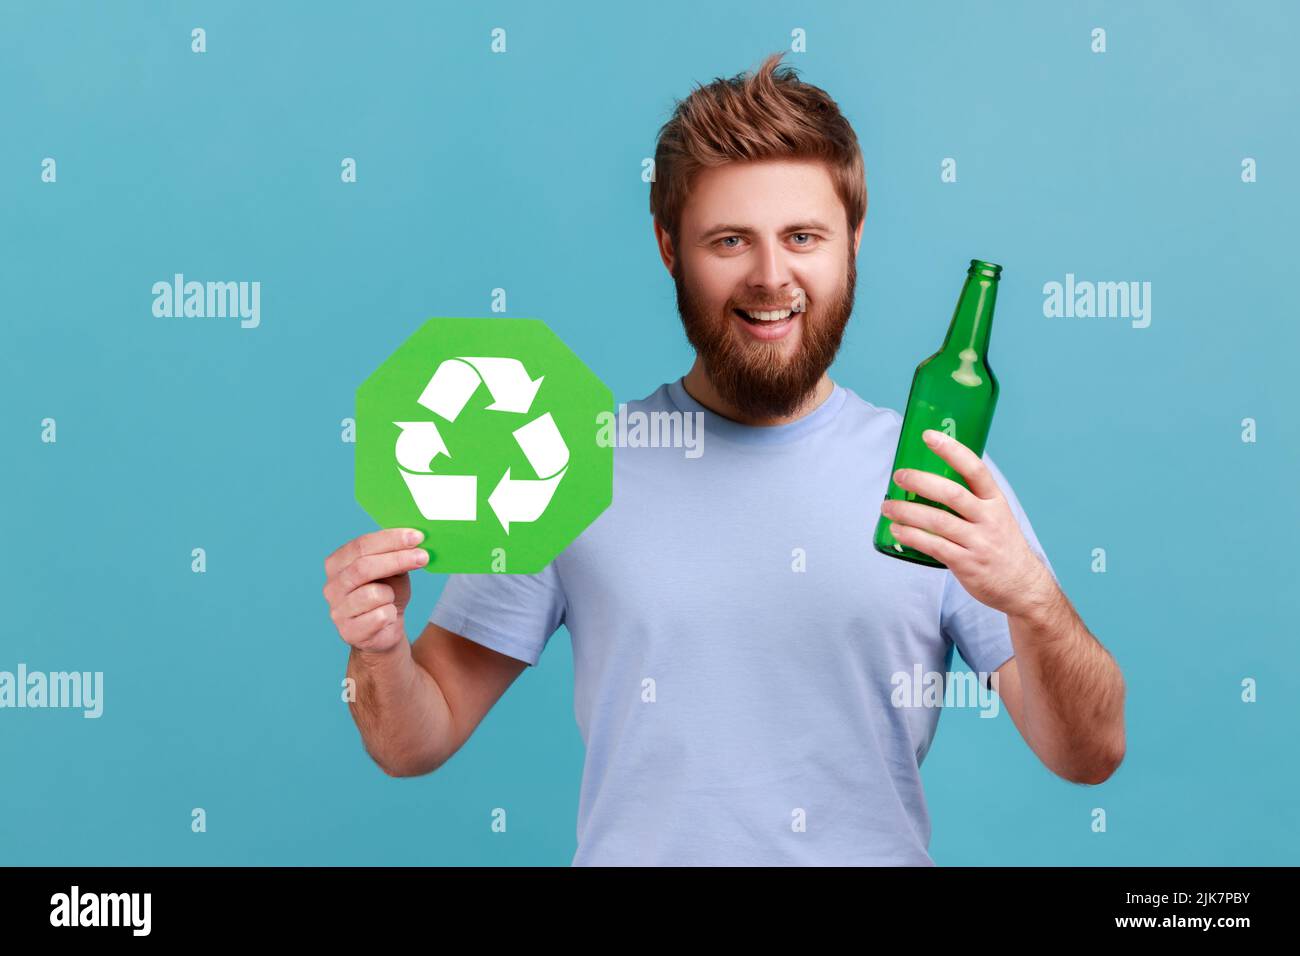 Portrait of smiling positive attractive bearded man holding glass bottle and recycling green symbol, sorting his rubbish, saving ecology. Indoor studio shot isolated on blue background. Stock Photo